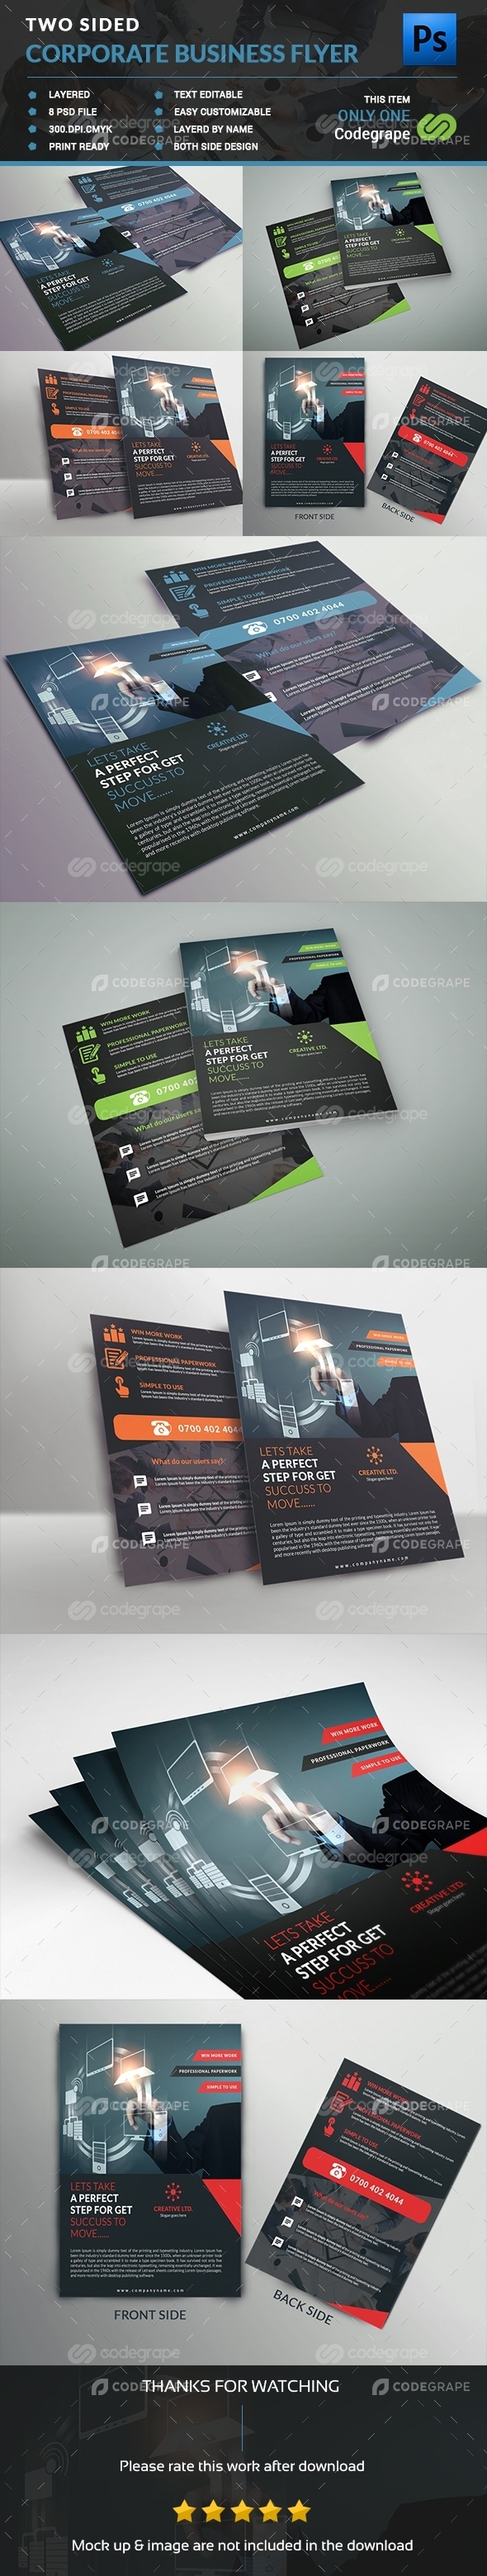 Corporate Flyer (Two sided)